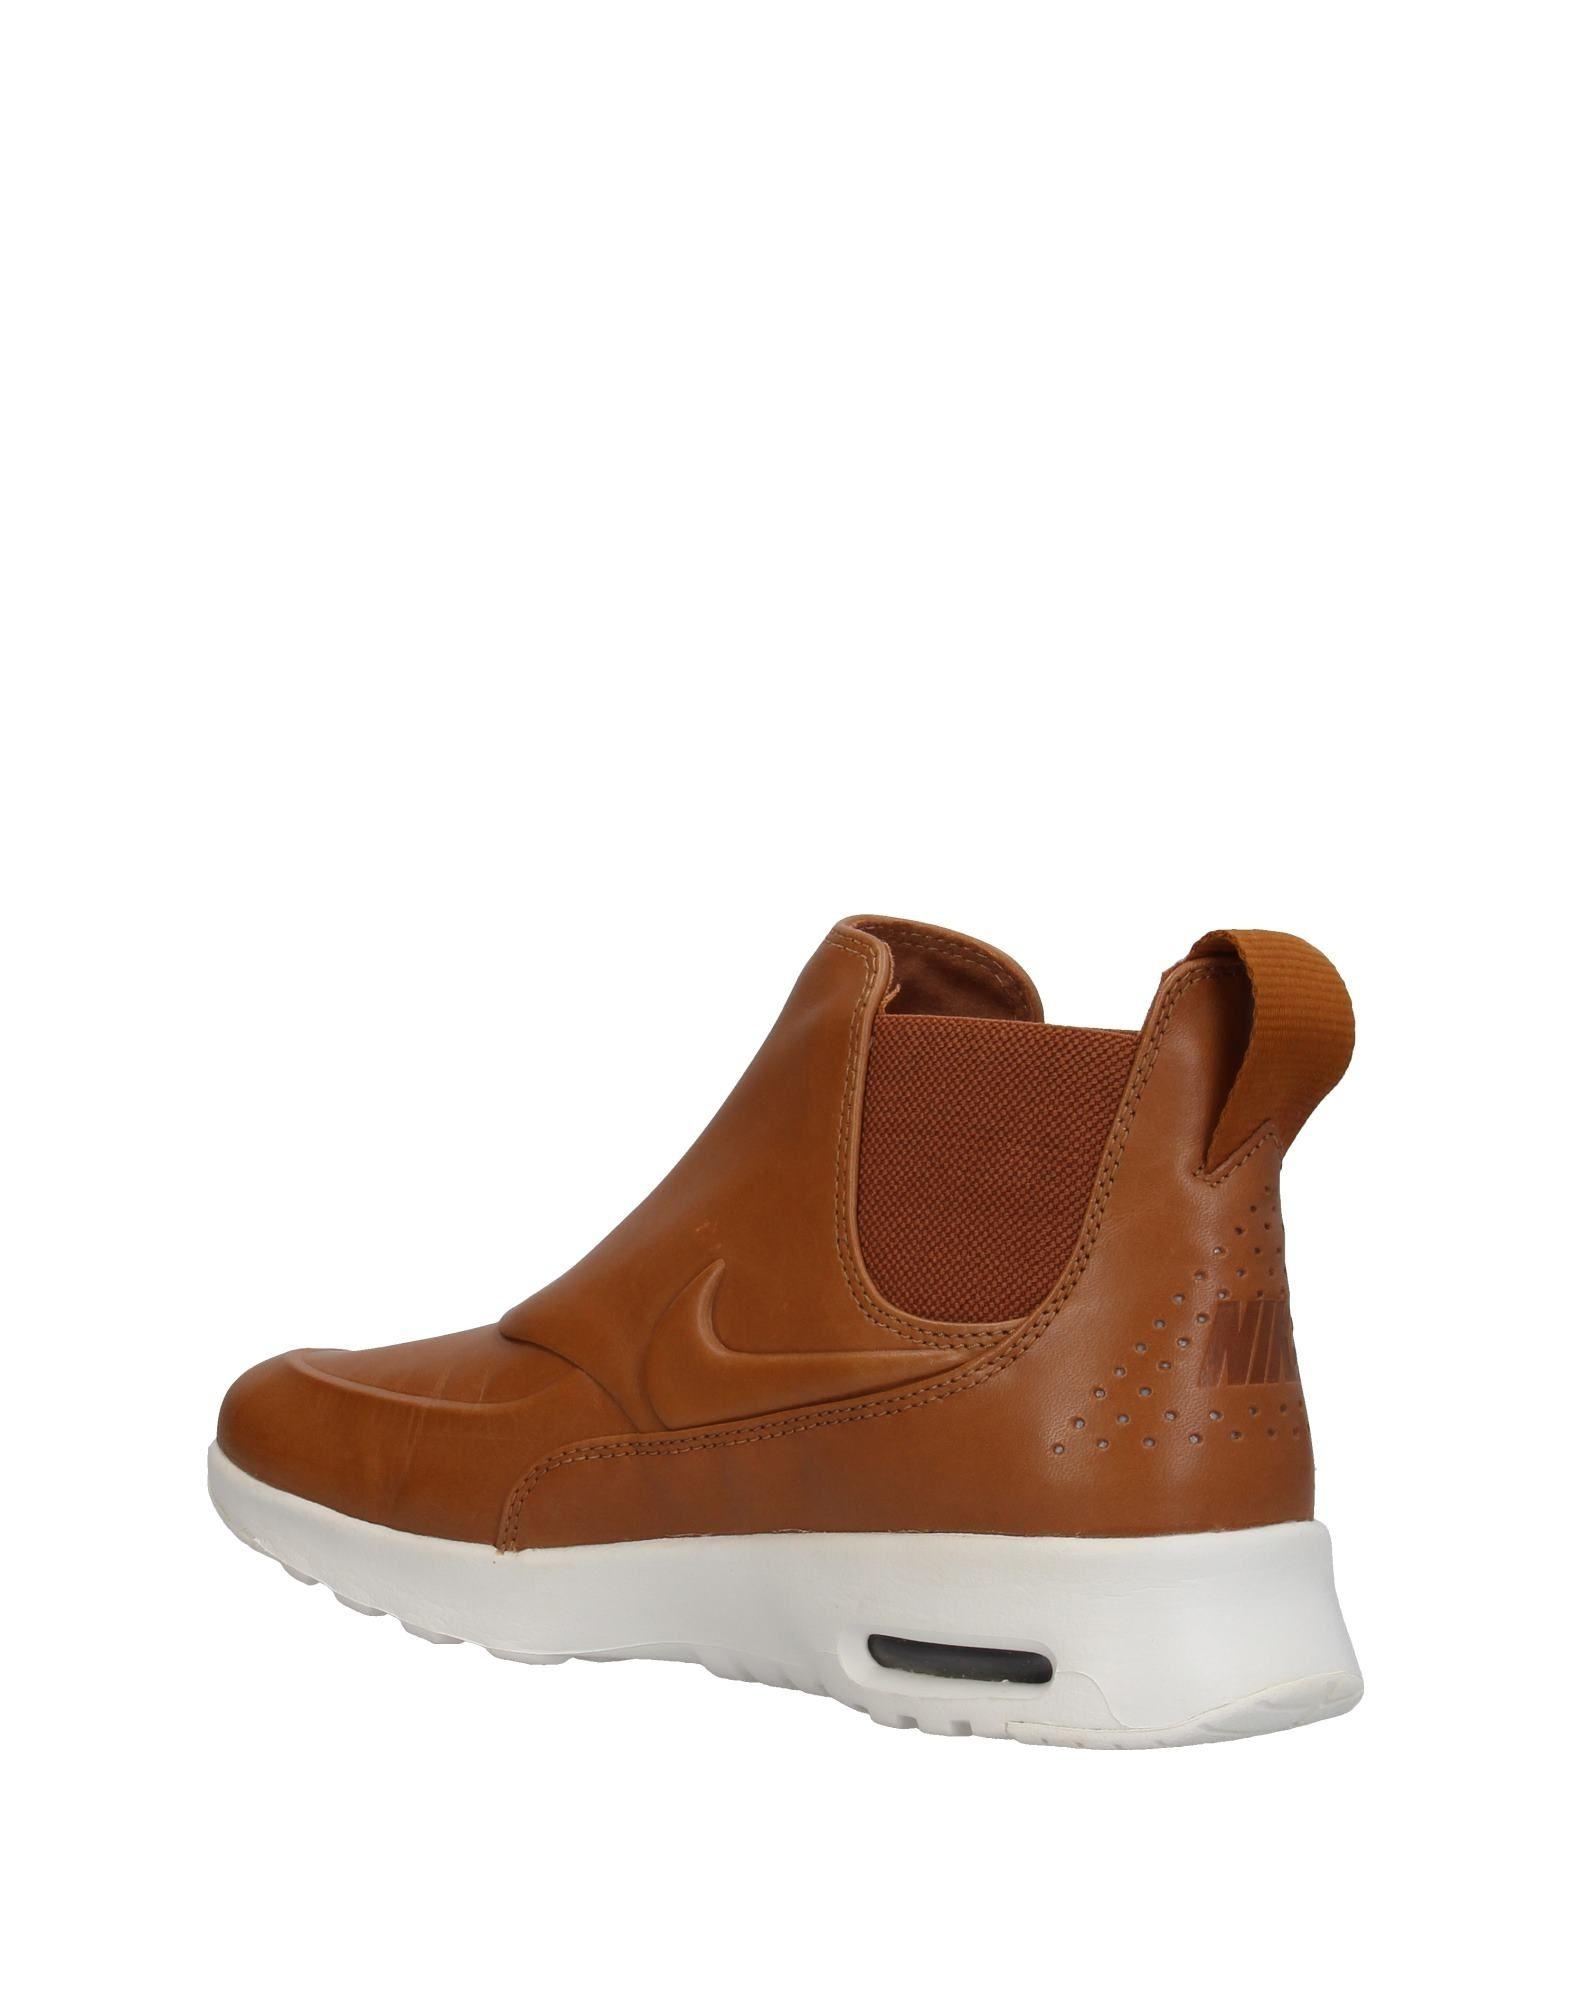 Nike Rubber High-tops & Sneakers in Camel (Brown) | Lyst